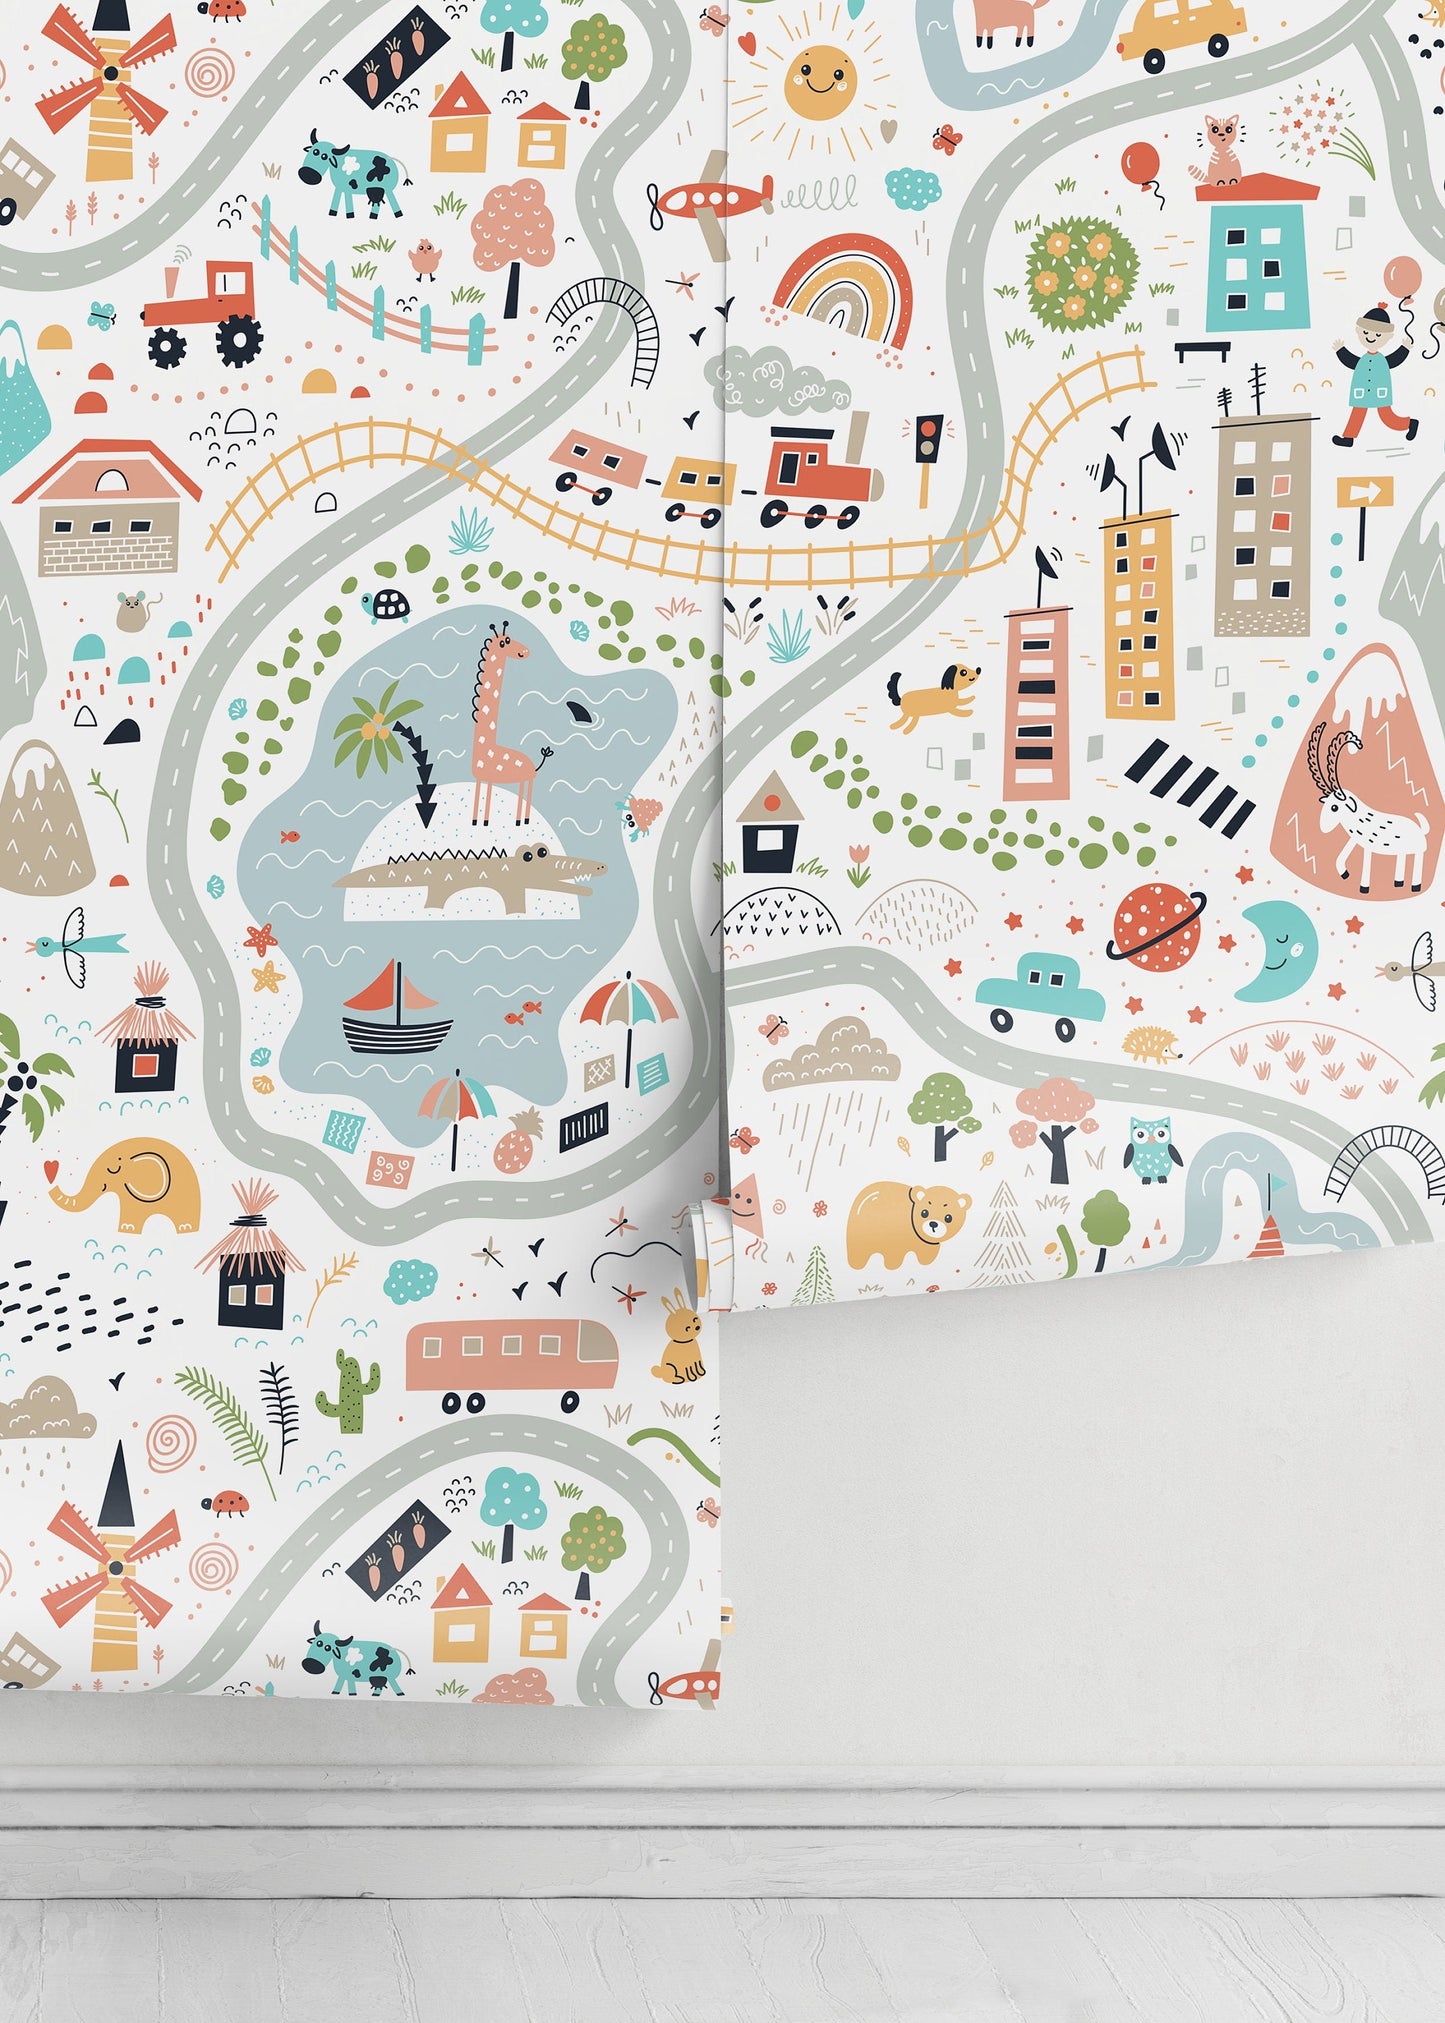 Colorful Town Map Wallpaper / Peel and Stick Wallpaper Removable Wallpaper Home Decor Wall Art Wall Decor Room Decor - D504